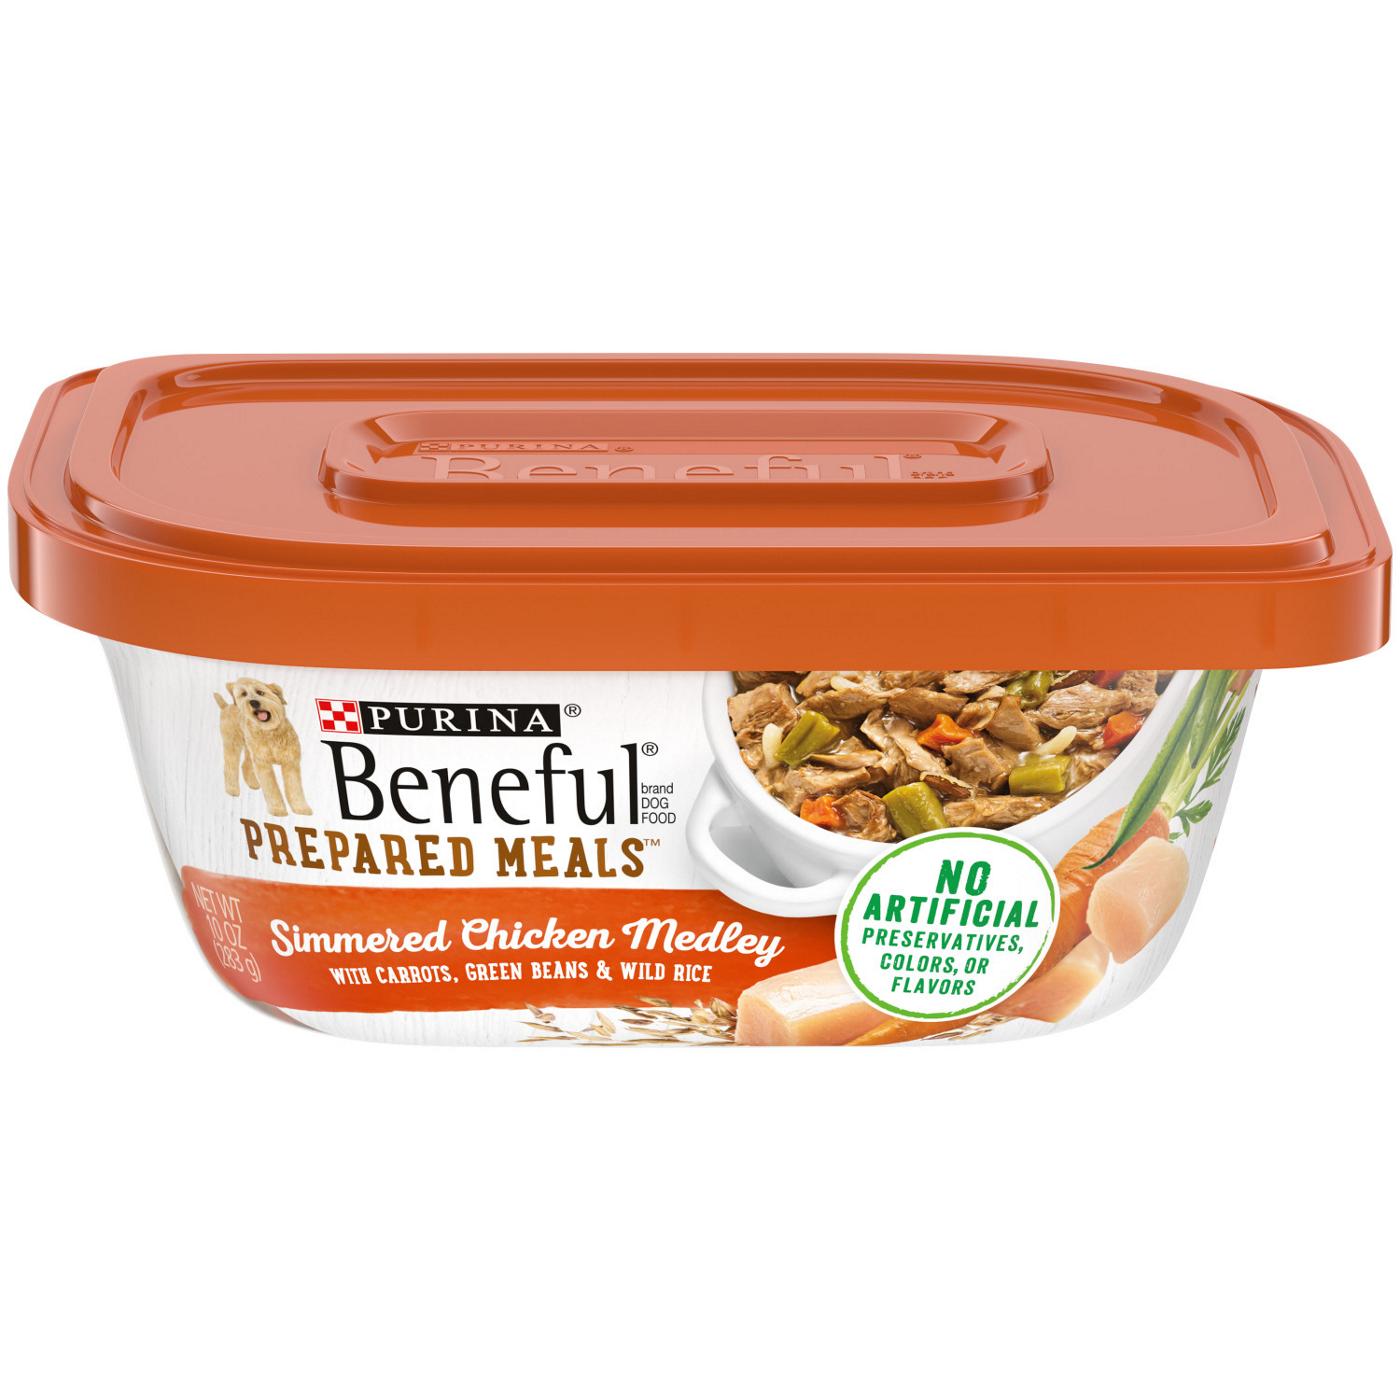 Beneful Purina Beneful High Protein Wet Dog Food With Gravy, Prepared Meals Simmered Chicken Medley; image 1 of 8